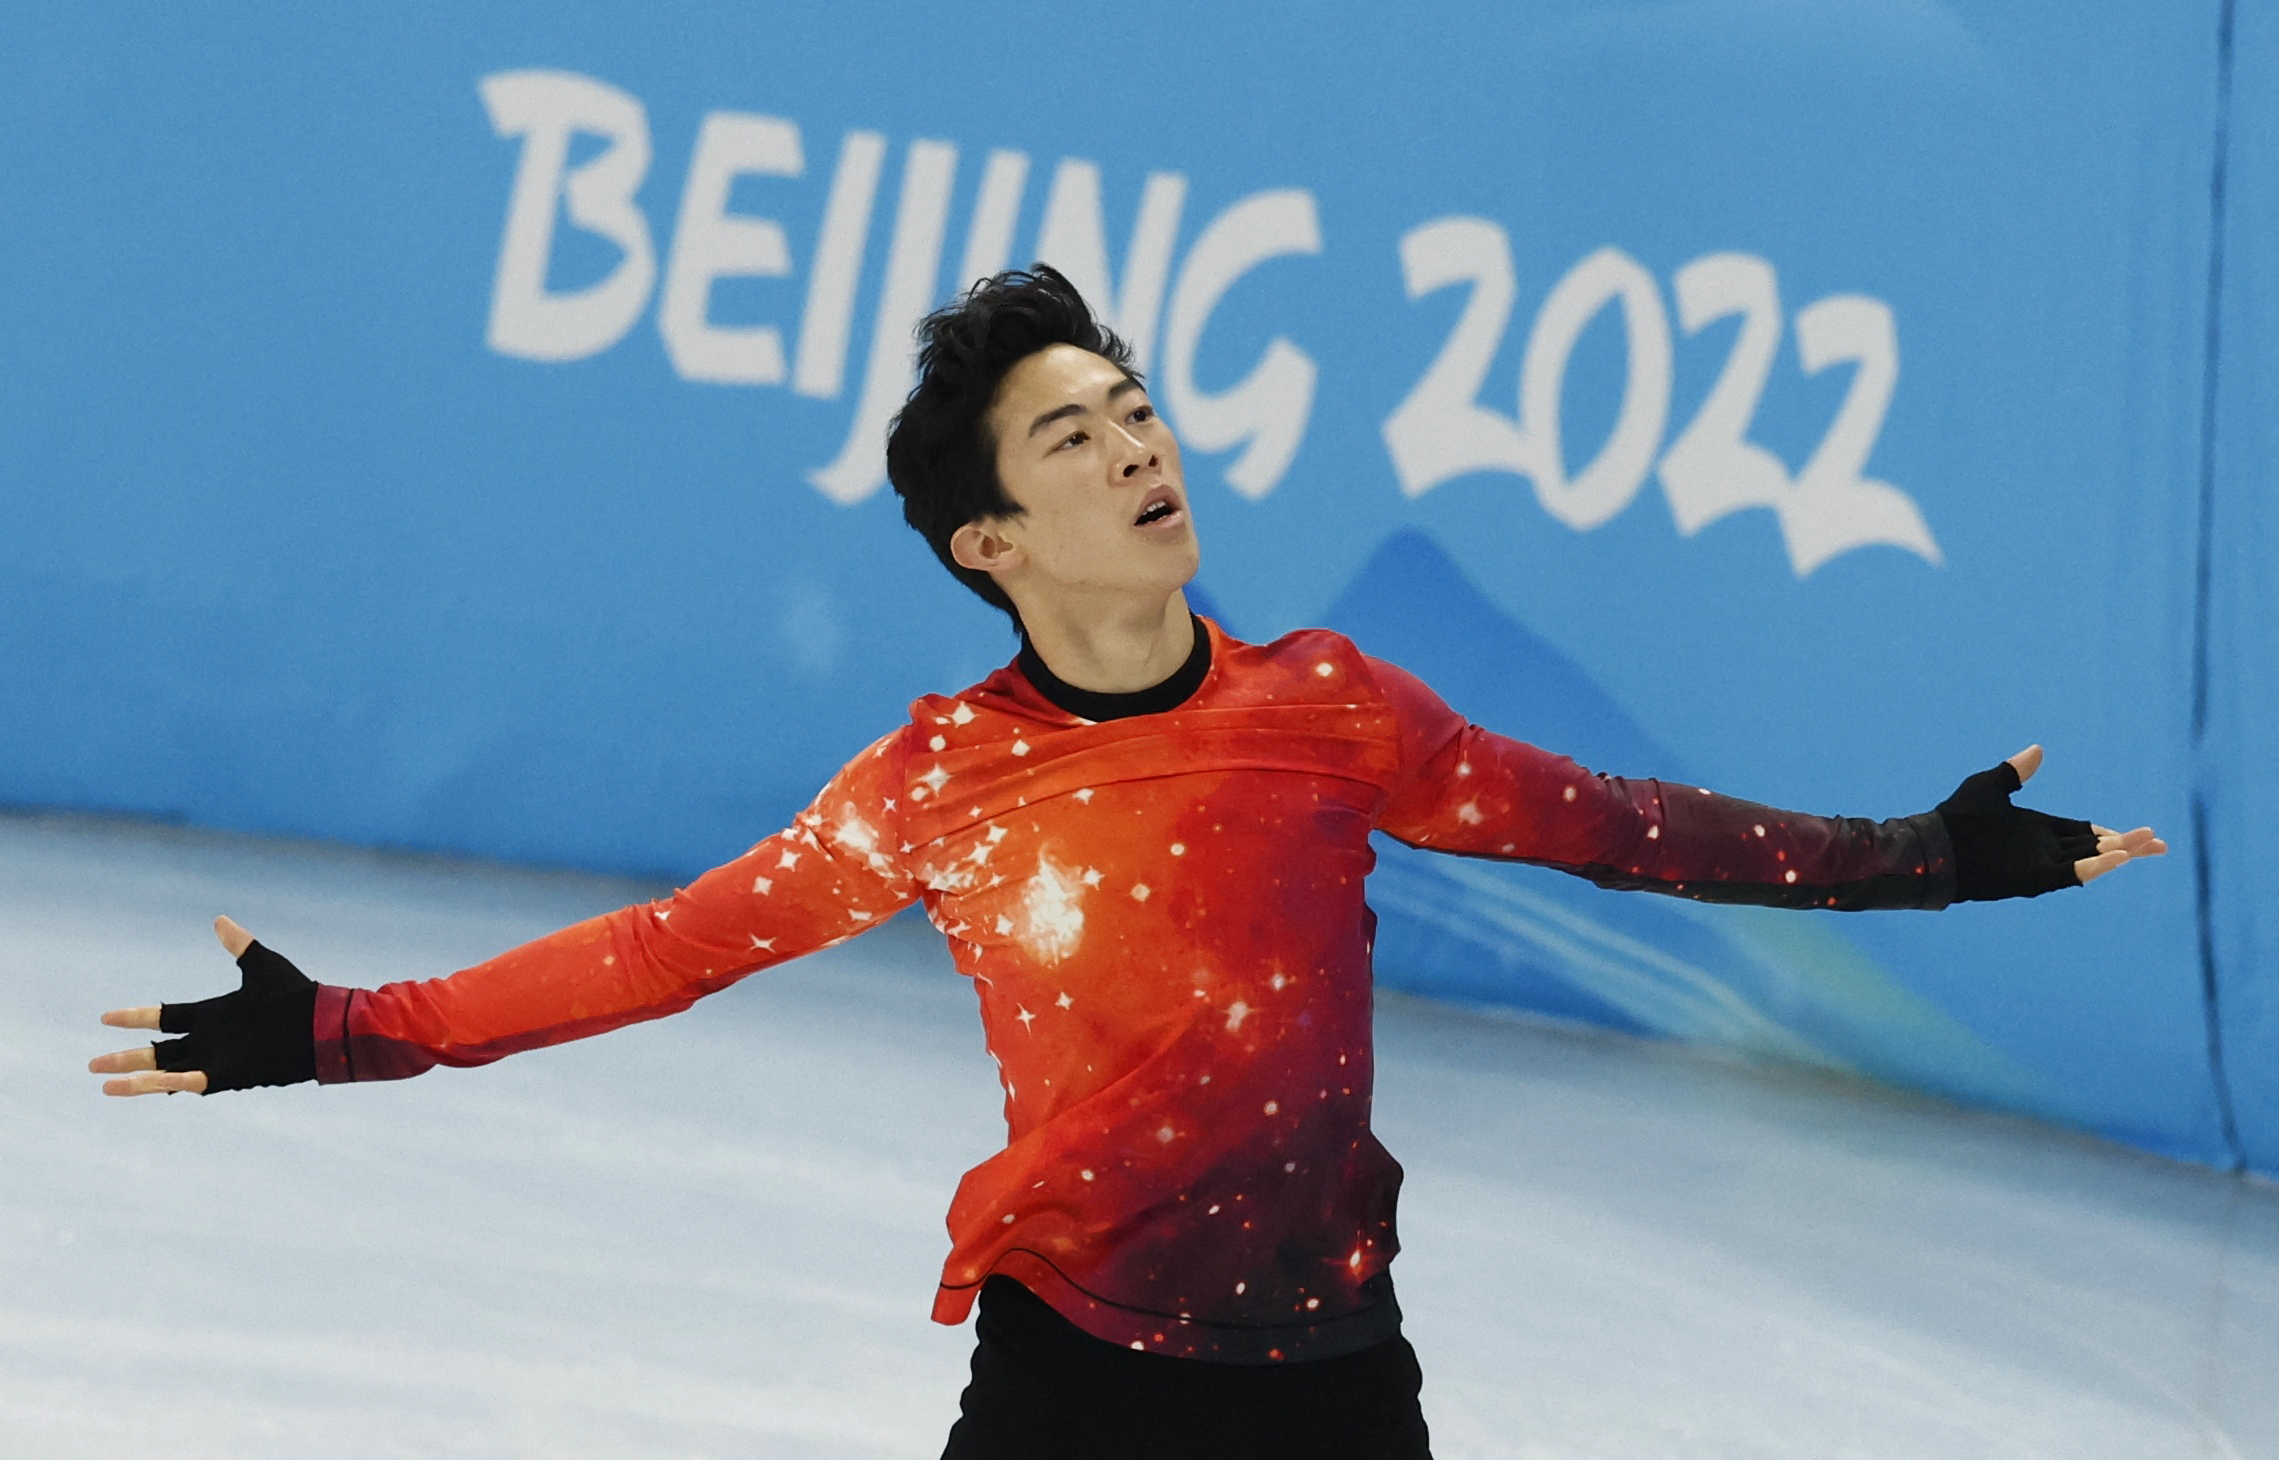 Olympic Champion Nathan Chen to Miss Worlds, Cites Injury